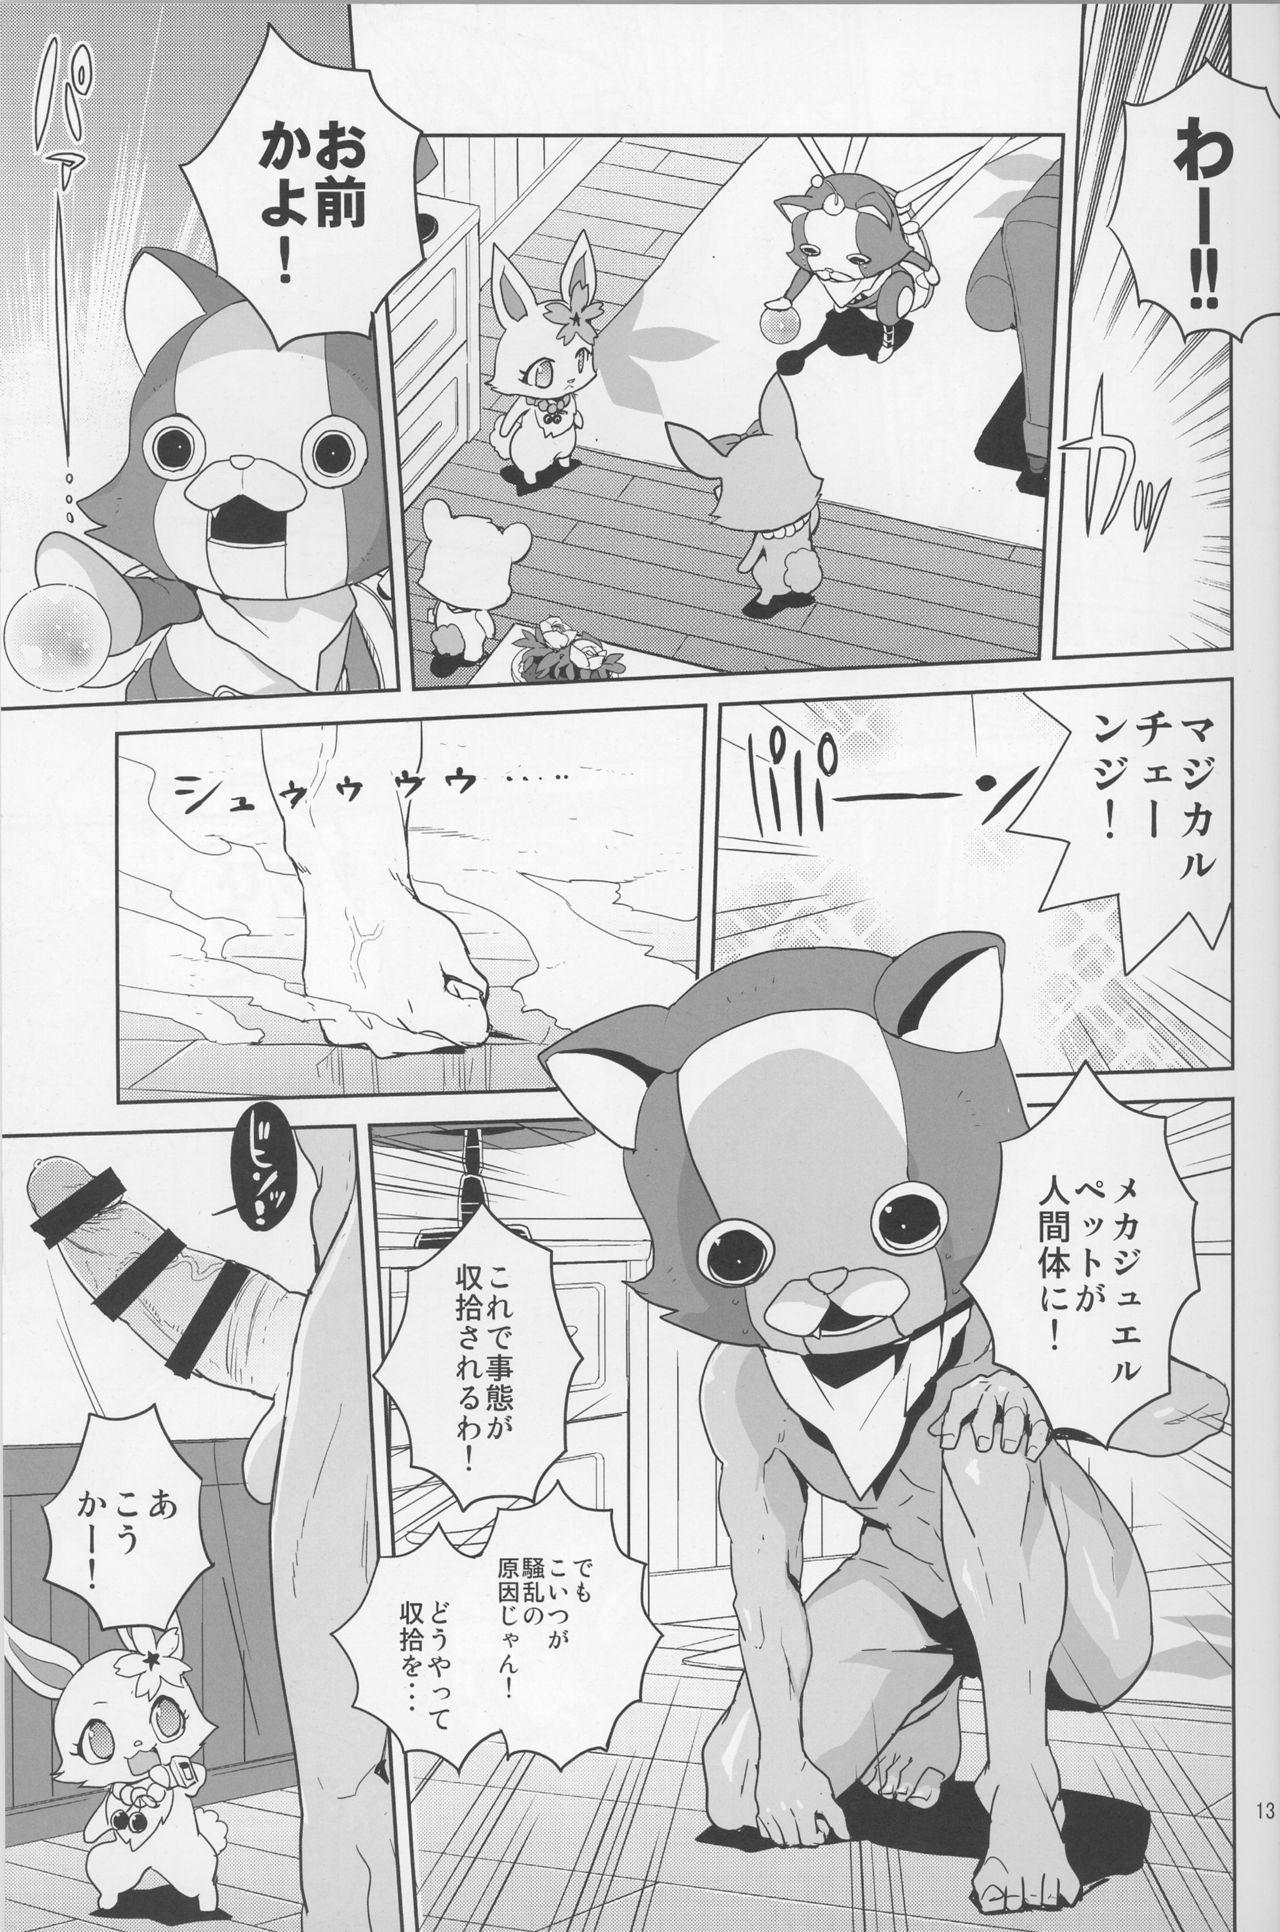 Gay Medical (SC2016 Summer) [Zenra Restaurant (Heriyama)] Laura-chan comment allez-vous (Jewelpet) - Jewelpet Gay Domination - Page 12